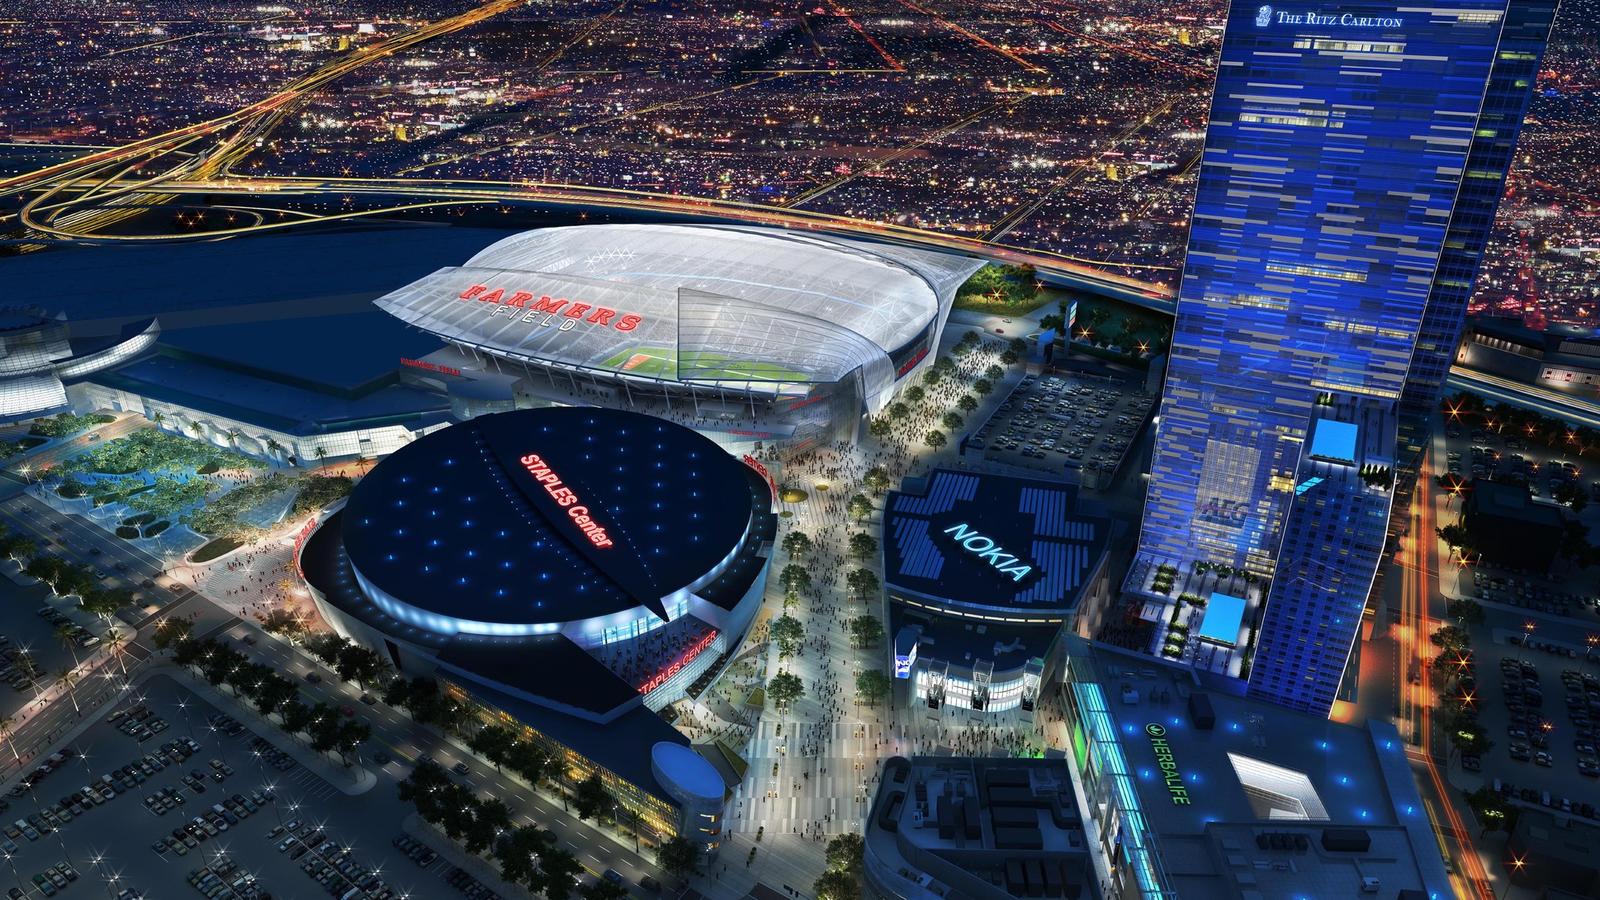 A rendering shows Farmers Field, an NFL stadium proposed by AEG for downtown adjacent to the L.A. Convention Center.